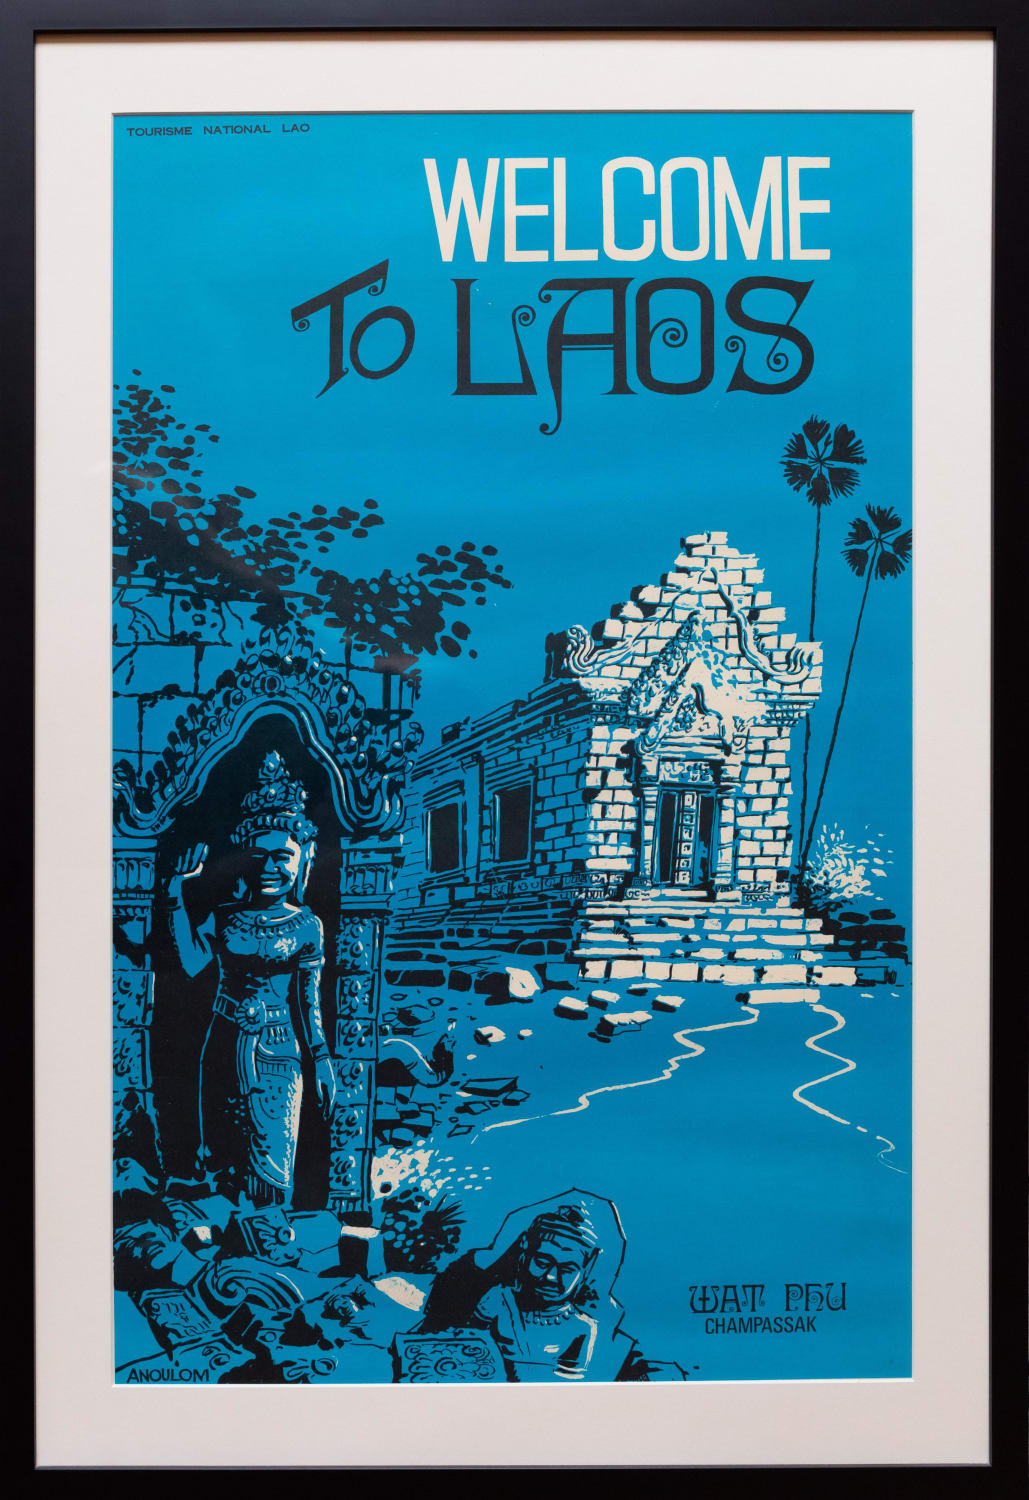 My parents bought this cool tourism poster when they lived in Laos in the 70's, which I had framed.